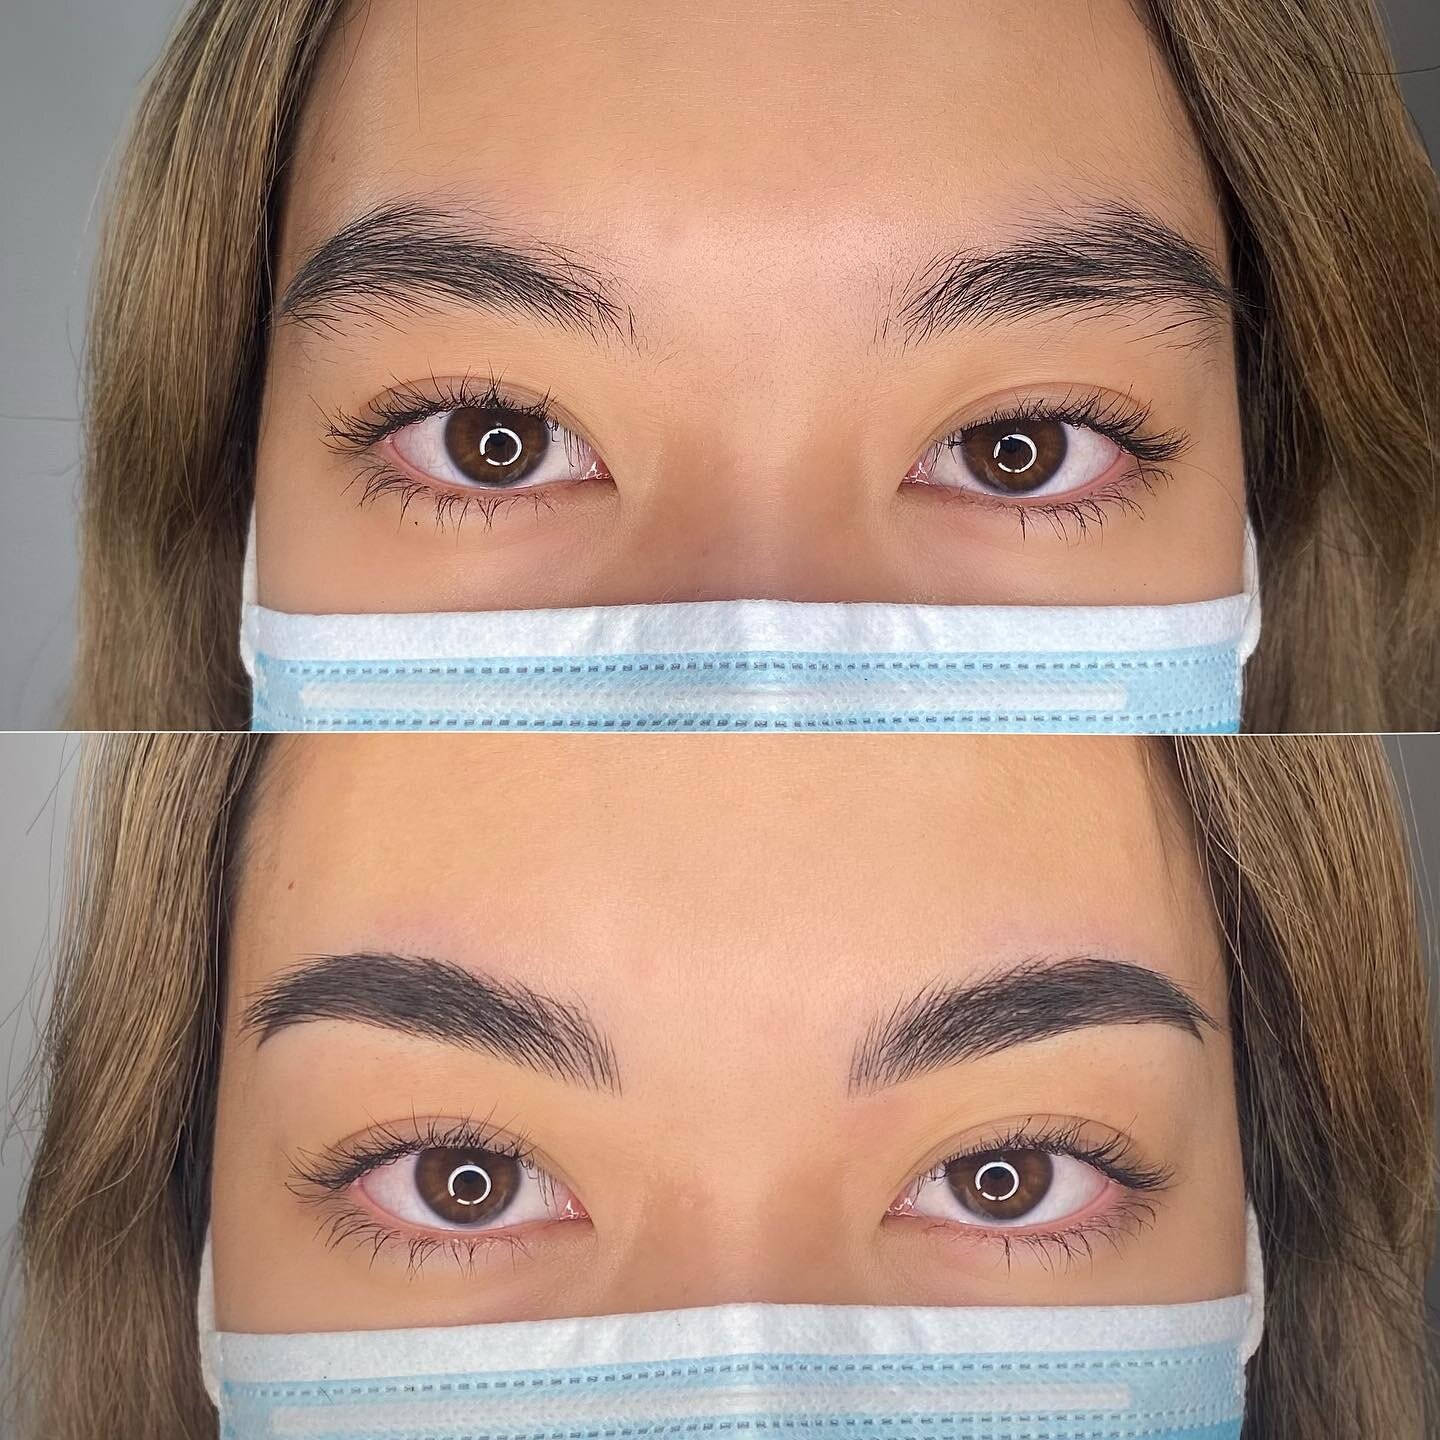 LUXURY NANO BROWS |  Who says thick brows can&rsquo;t enjoy nano brows too?!? 😍

Technique: Nano shading 
Colour: Mud + Lava
Price: $400 (including free touch up)
Longevity: Up to 1.5 - 2 years

#calgarybrows #yycbrows #yycnanobrows #yycmicroblading